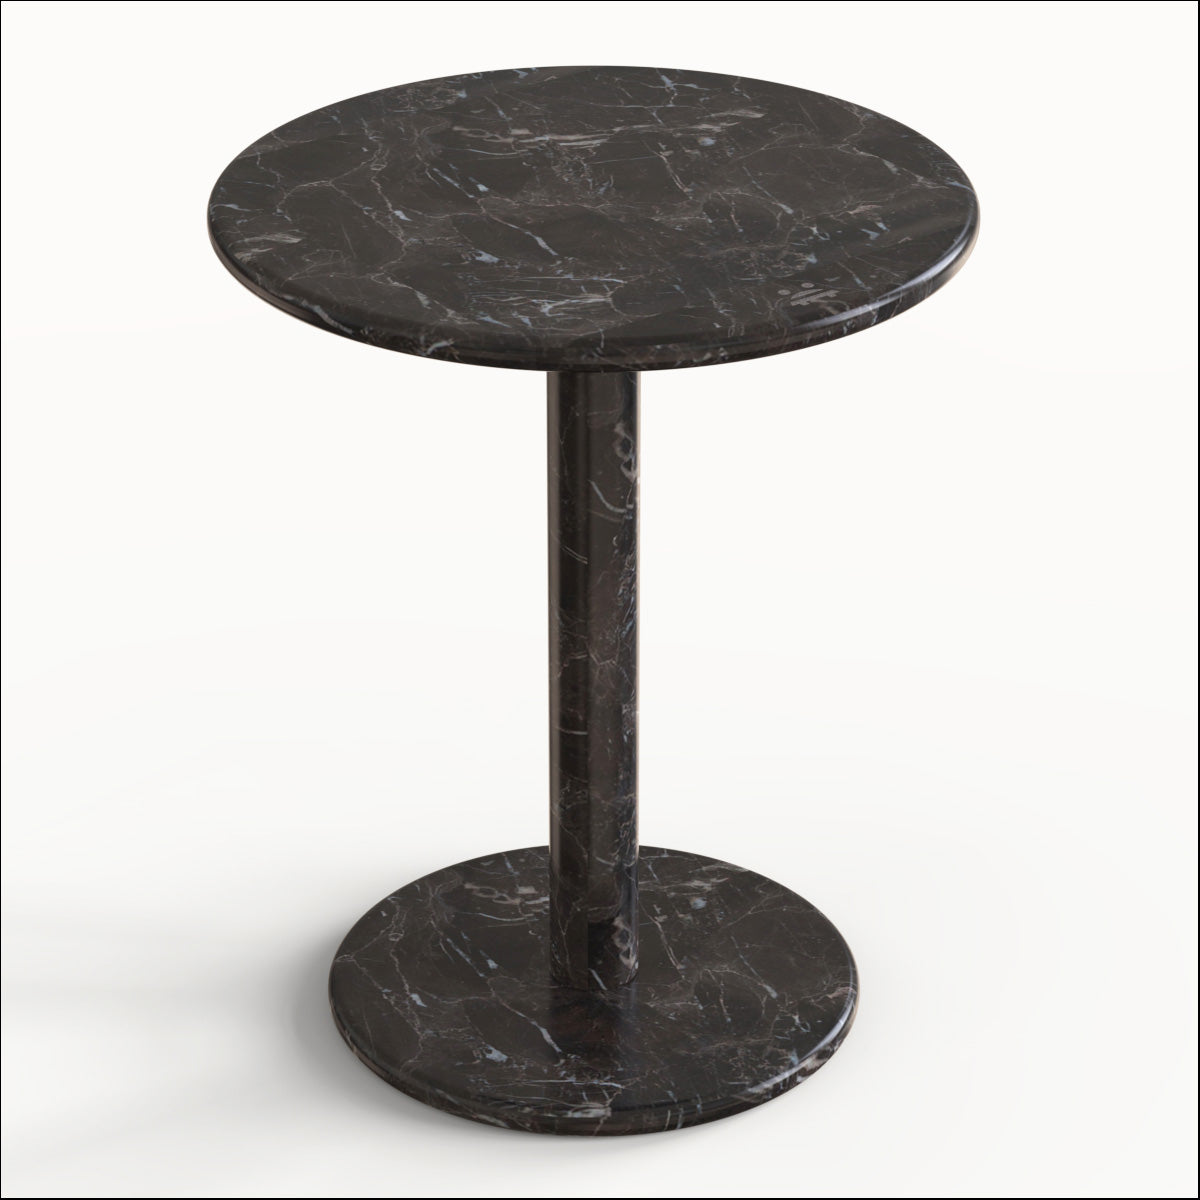 OIXDESIGN RoundHaven Medium Side Table, Spanish Emperador Marble, Micro Scene Graph, Side View